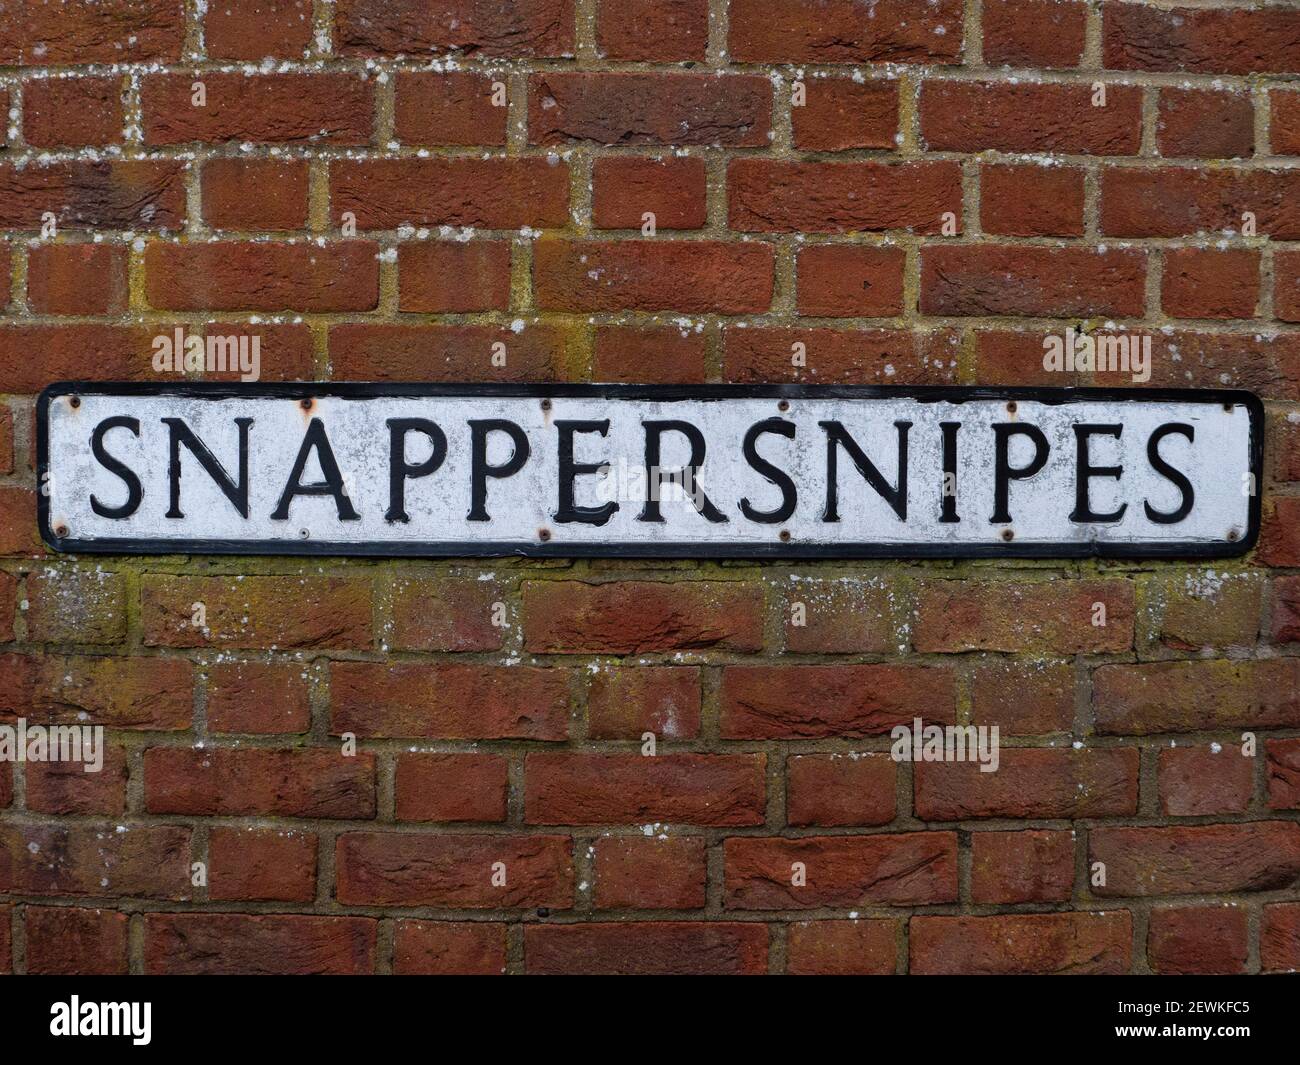 An unusual road name, 'Snappersnipes' in Westbury, Wiltshire, England, UK. Stock Photo